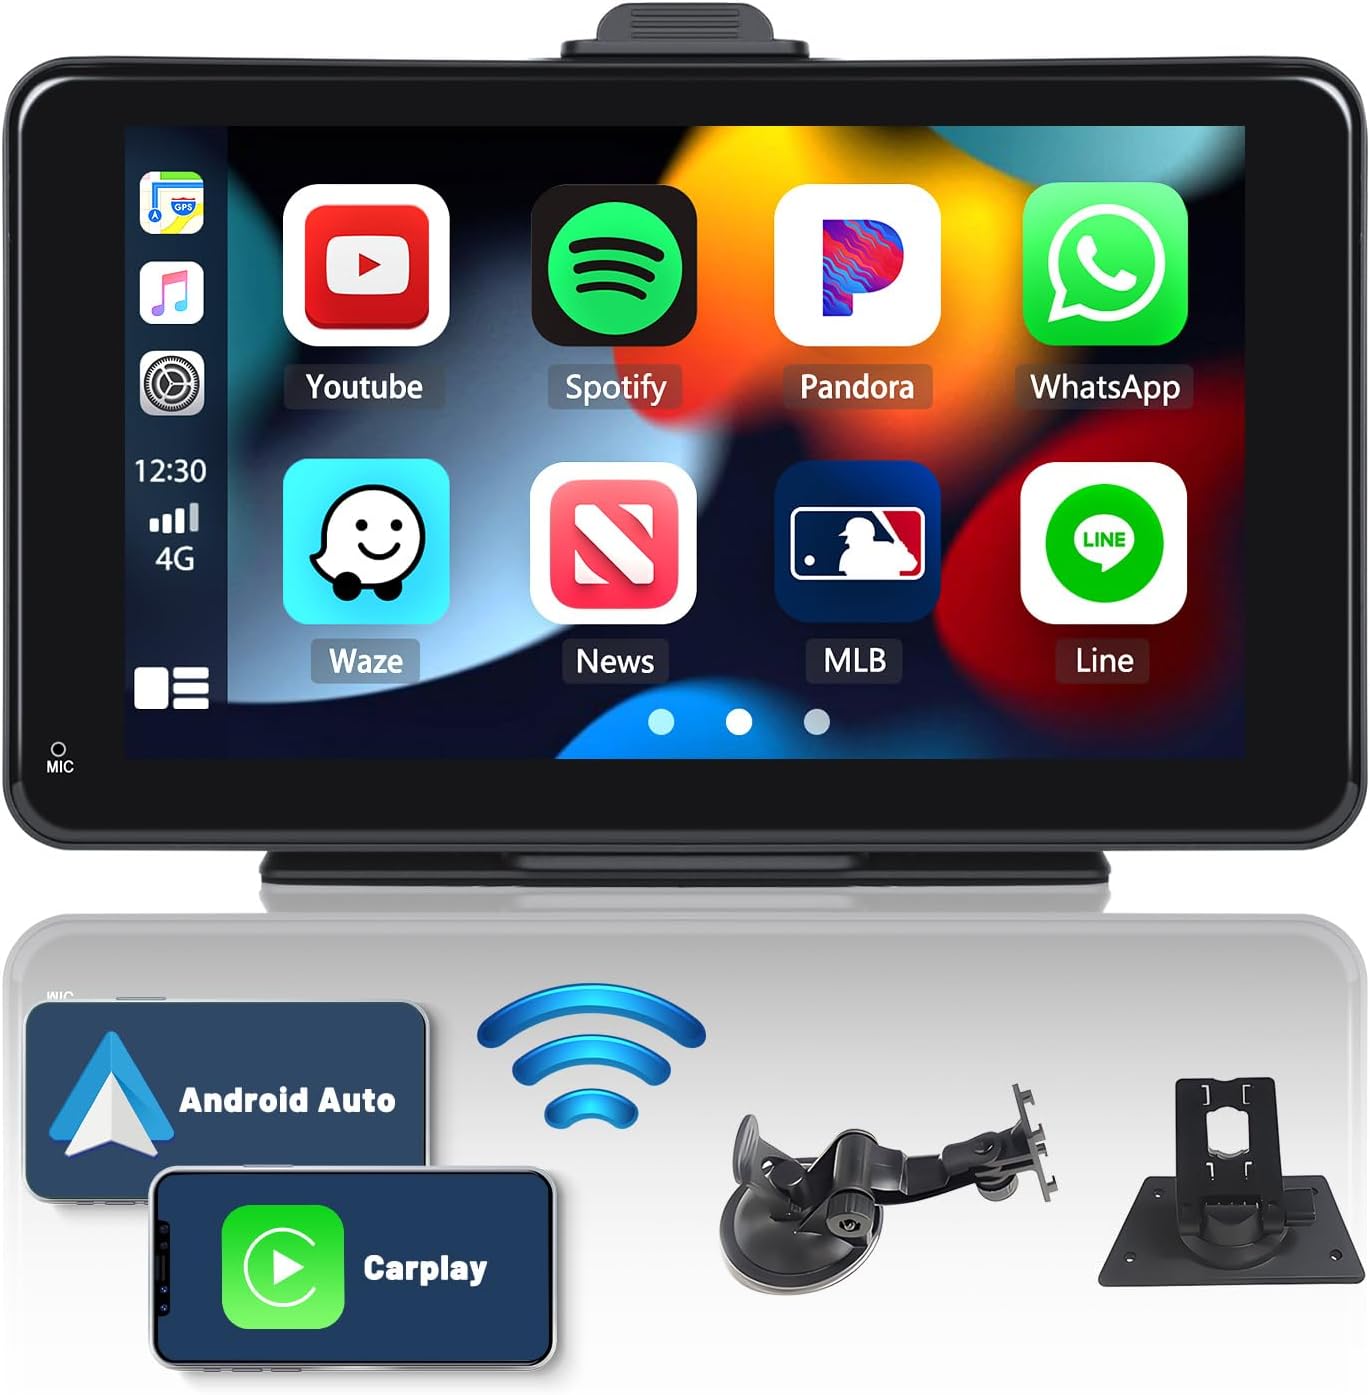 Portable Apple Carplay Screen Wireless Apple Car Play Android Auto, 7 Inch Touchscreen Wireless Carplay Screen for Car Support Apple Airplay Voice Control FM Bluetooth AUX